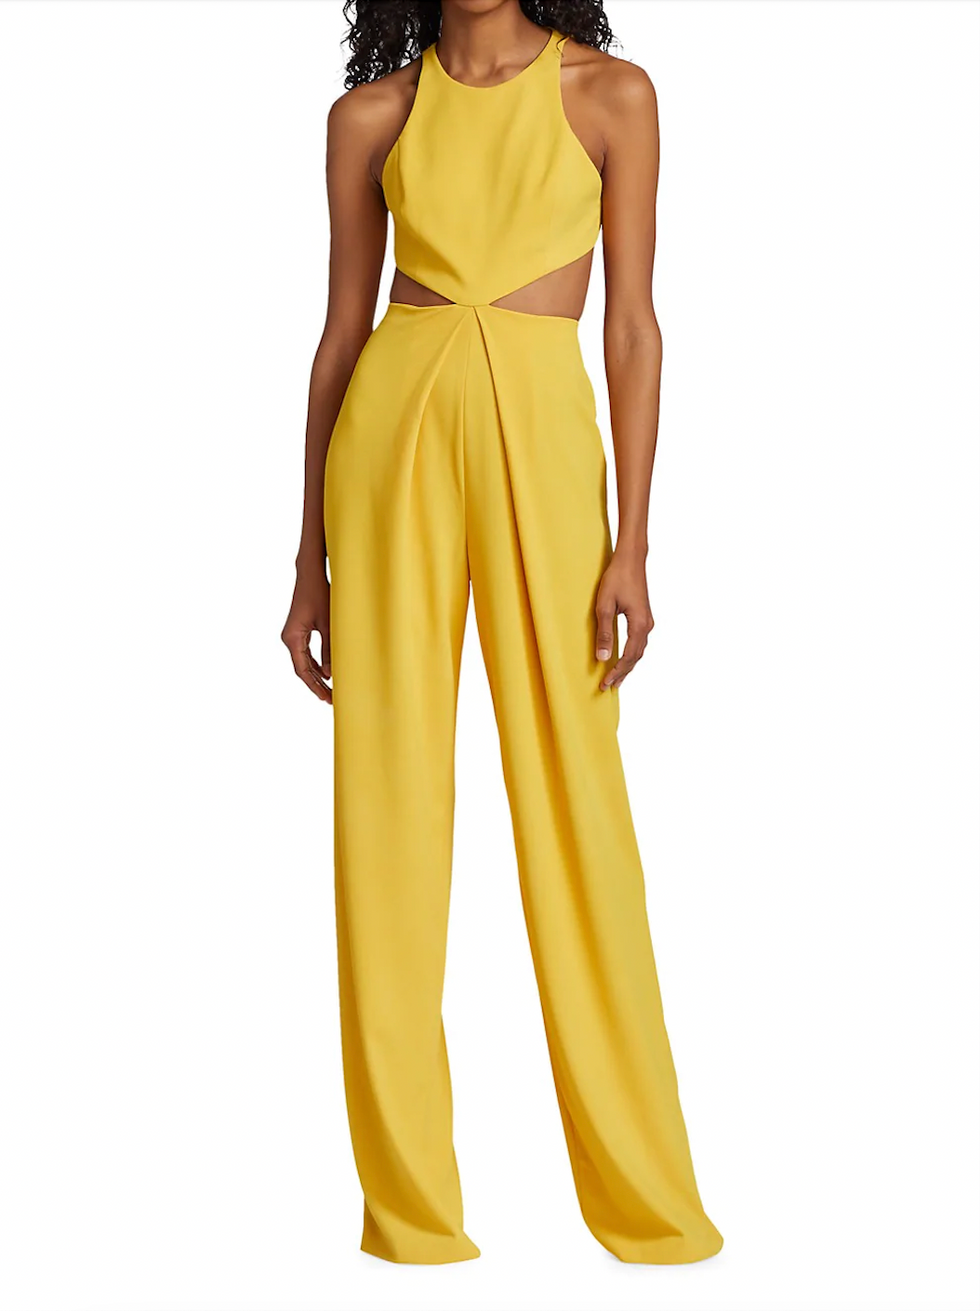 Swap Out the Dress for These Classy Wedding Guest Jumpsuits - Brit + Co